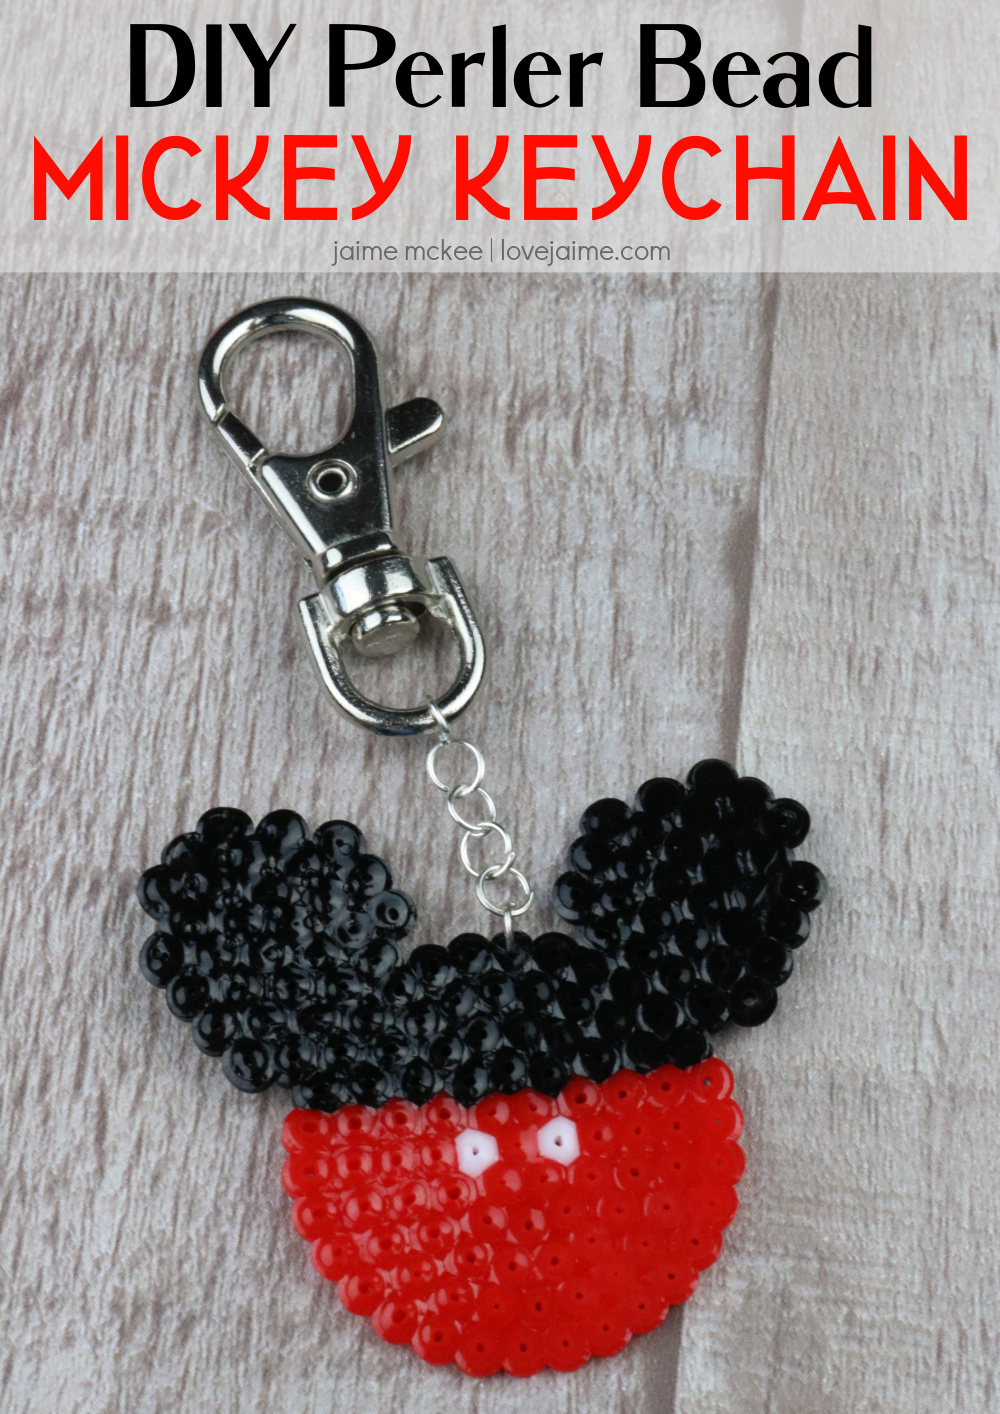 Get crafty with this Perler Bead Mickey Mouse Keychain tutorial